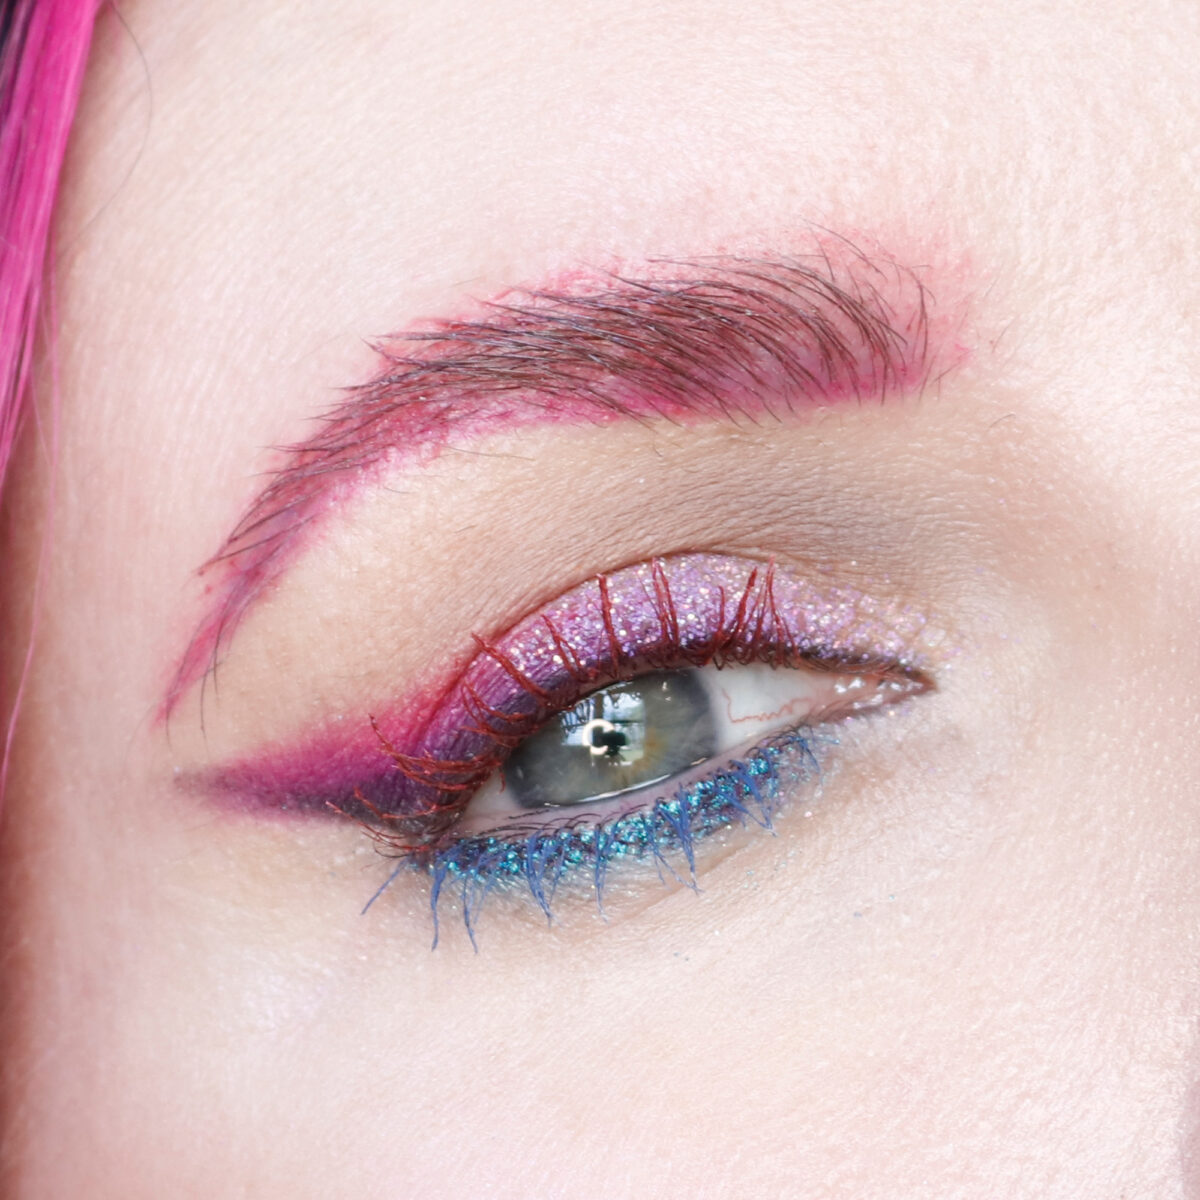 Bisexual Pride Eye Makeup Inspiration by Cordelia Frost